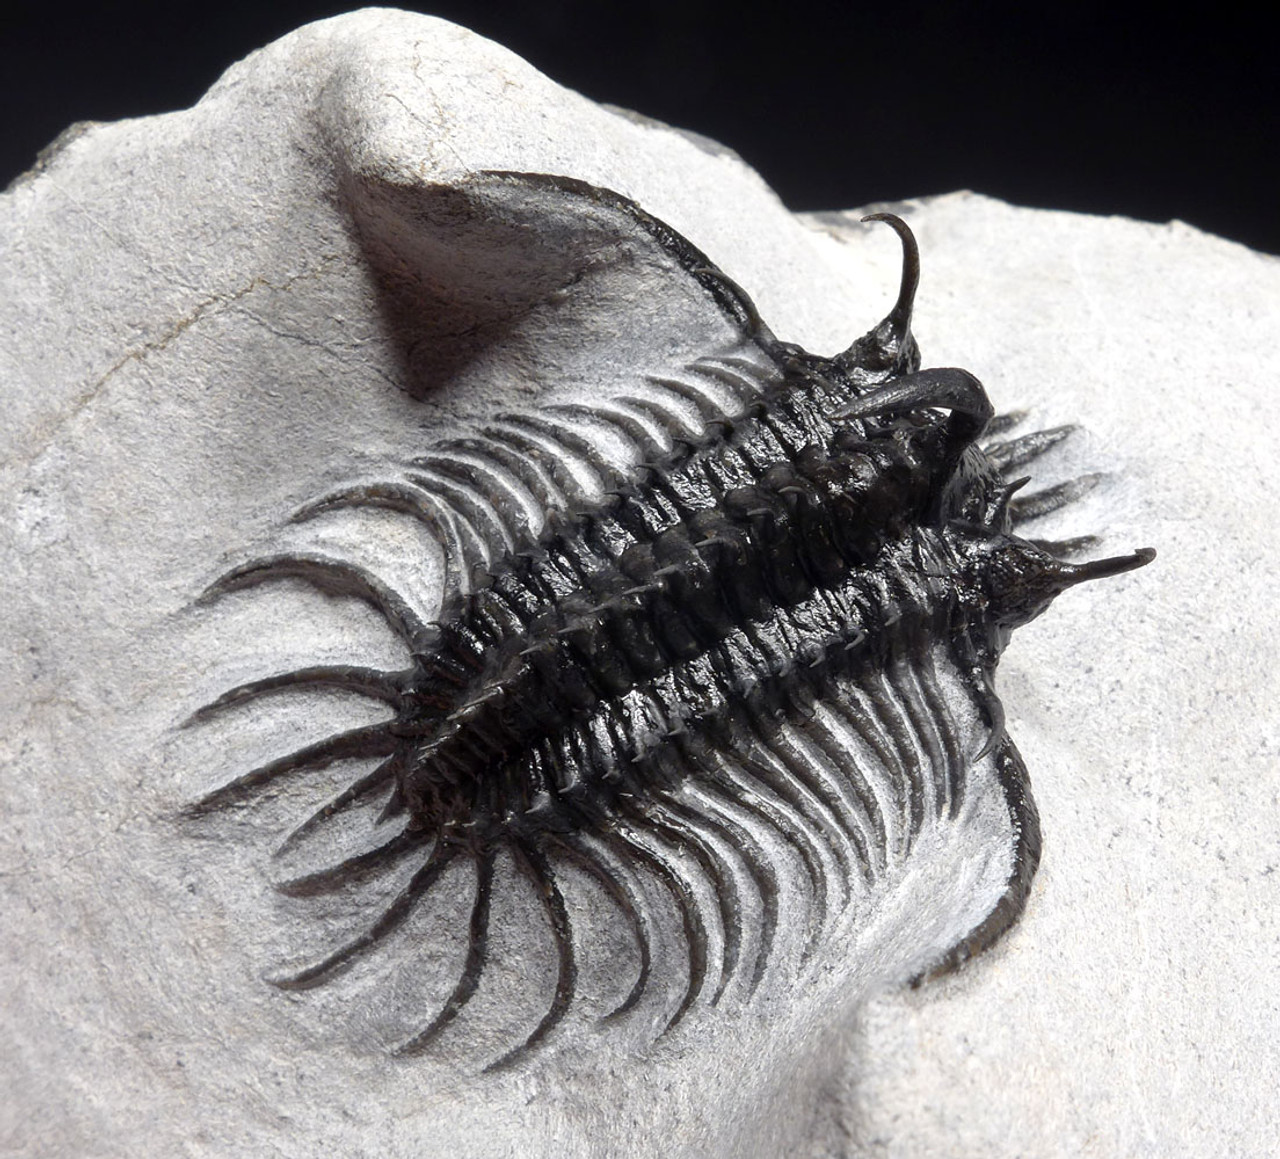 FINEST LONG-SPINED SPINY QUADROPS TRILOBITE WITH ALL SPINES EXPOSED  *TRX502